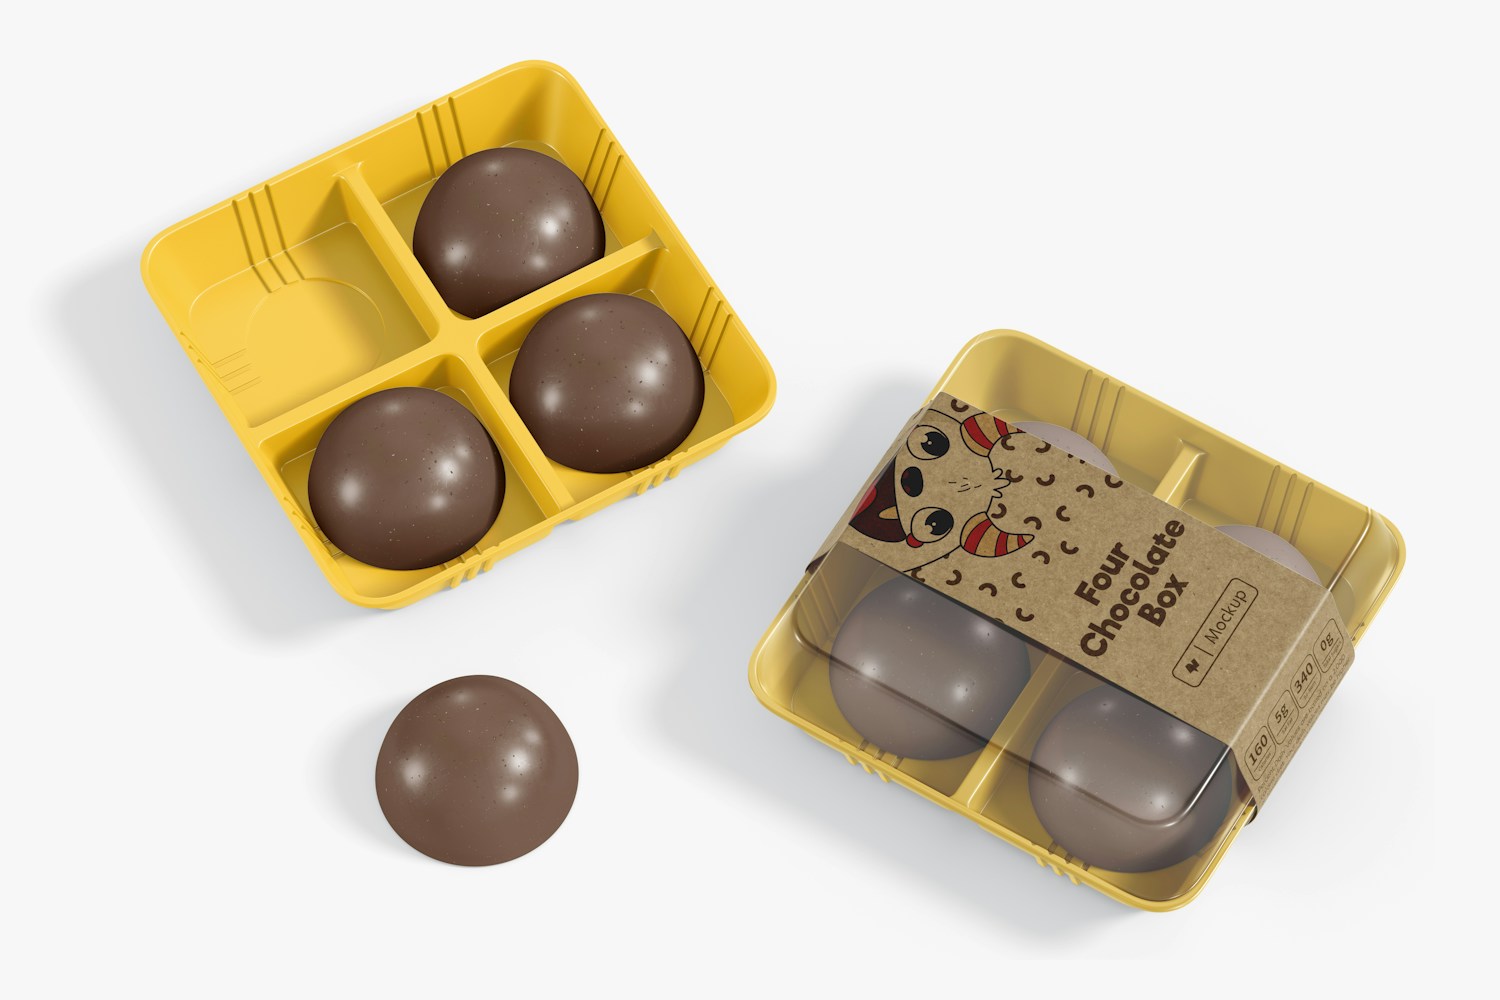 Four Chocolate Boxes Mockup, Top View